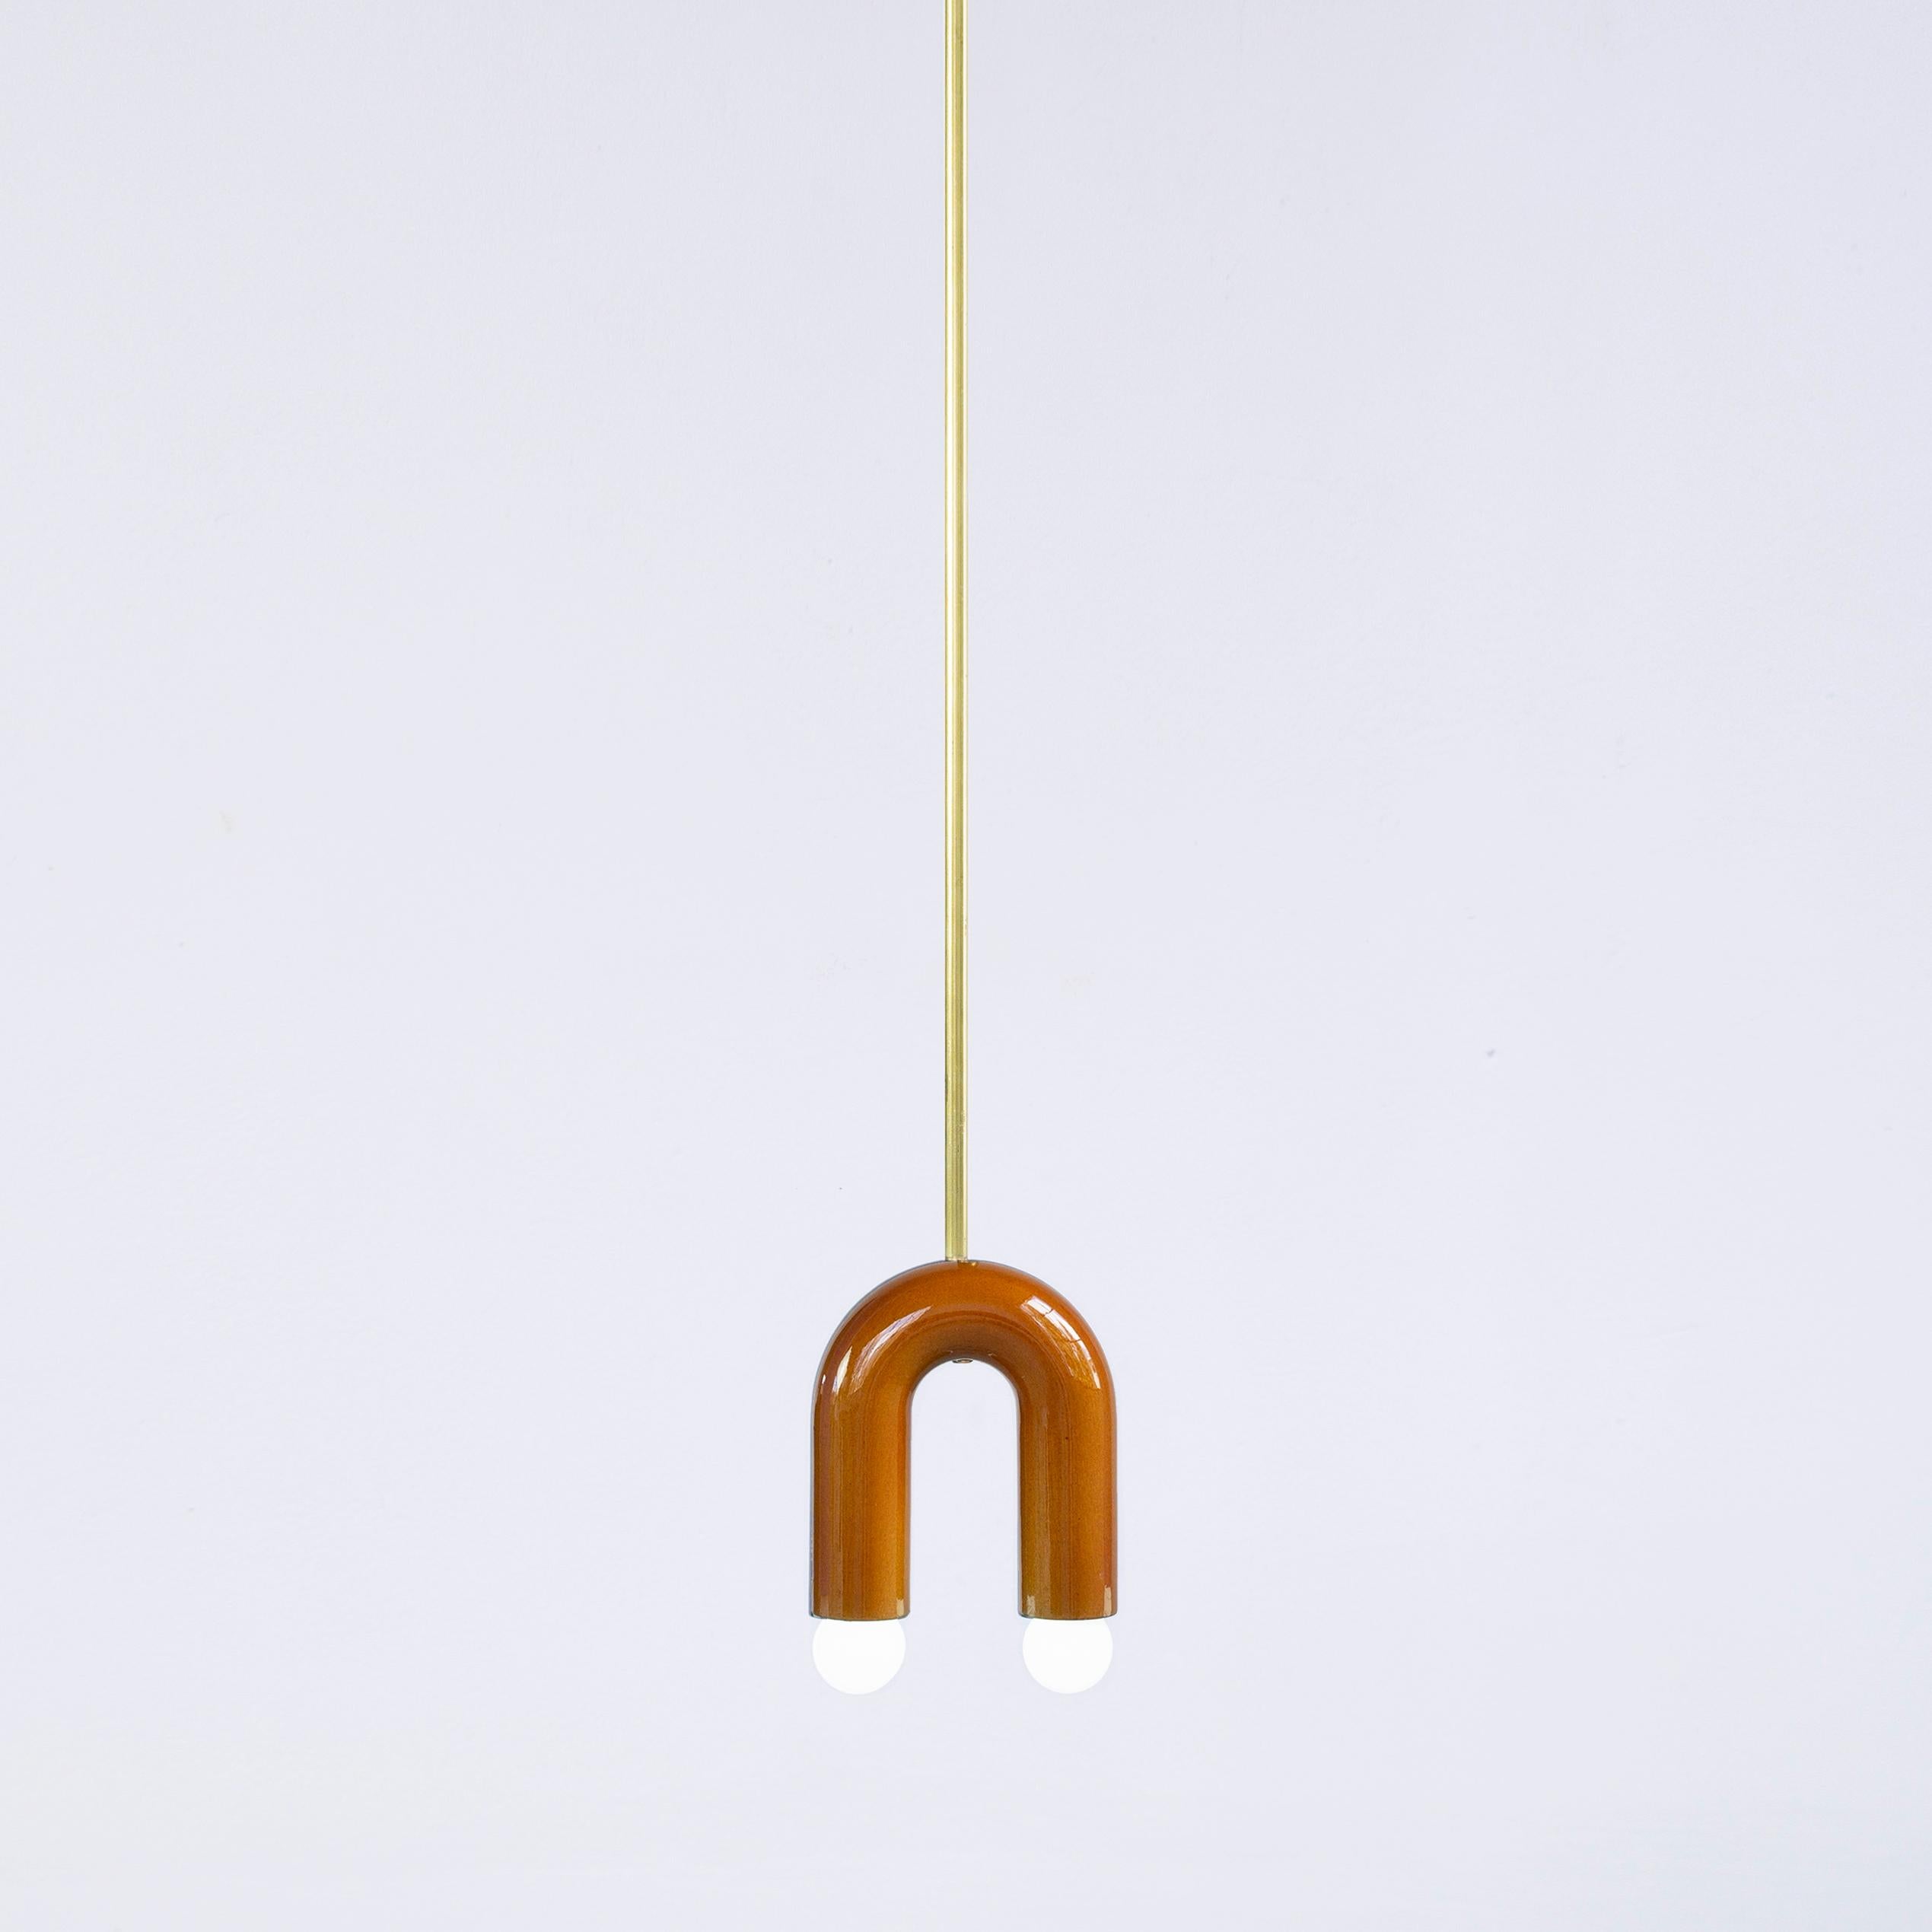 TRN A1 Pendant lamp / ceiling lamp / chandelier
Designer: Pani Jurek

Model shown: Ochre
Dimensions: H 17.5 x 15 x 5 cm

Bulb (not included): E27/E26, compatible with US electric system

Materials: Hand glazed ceramic and brass
Rod: brass, length